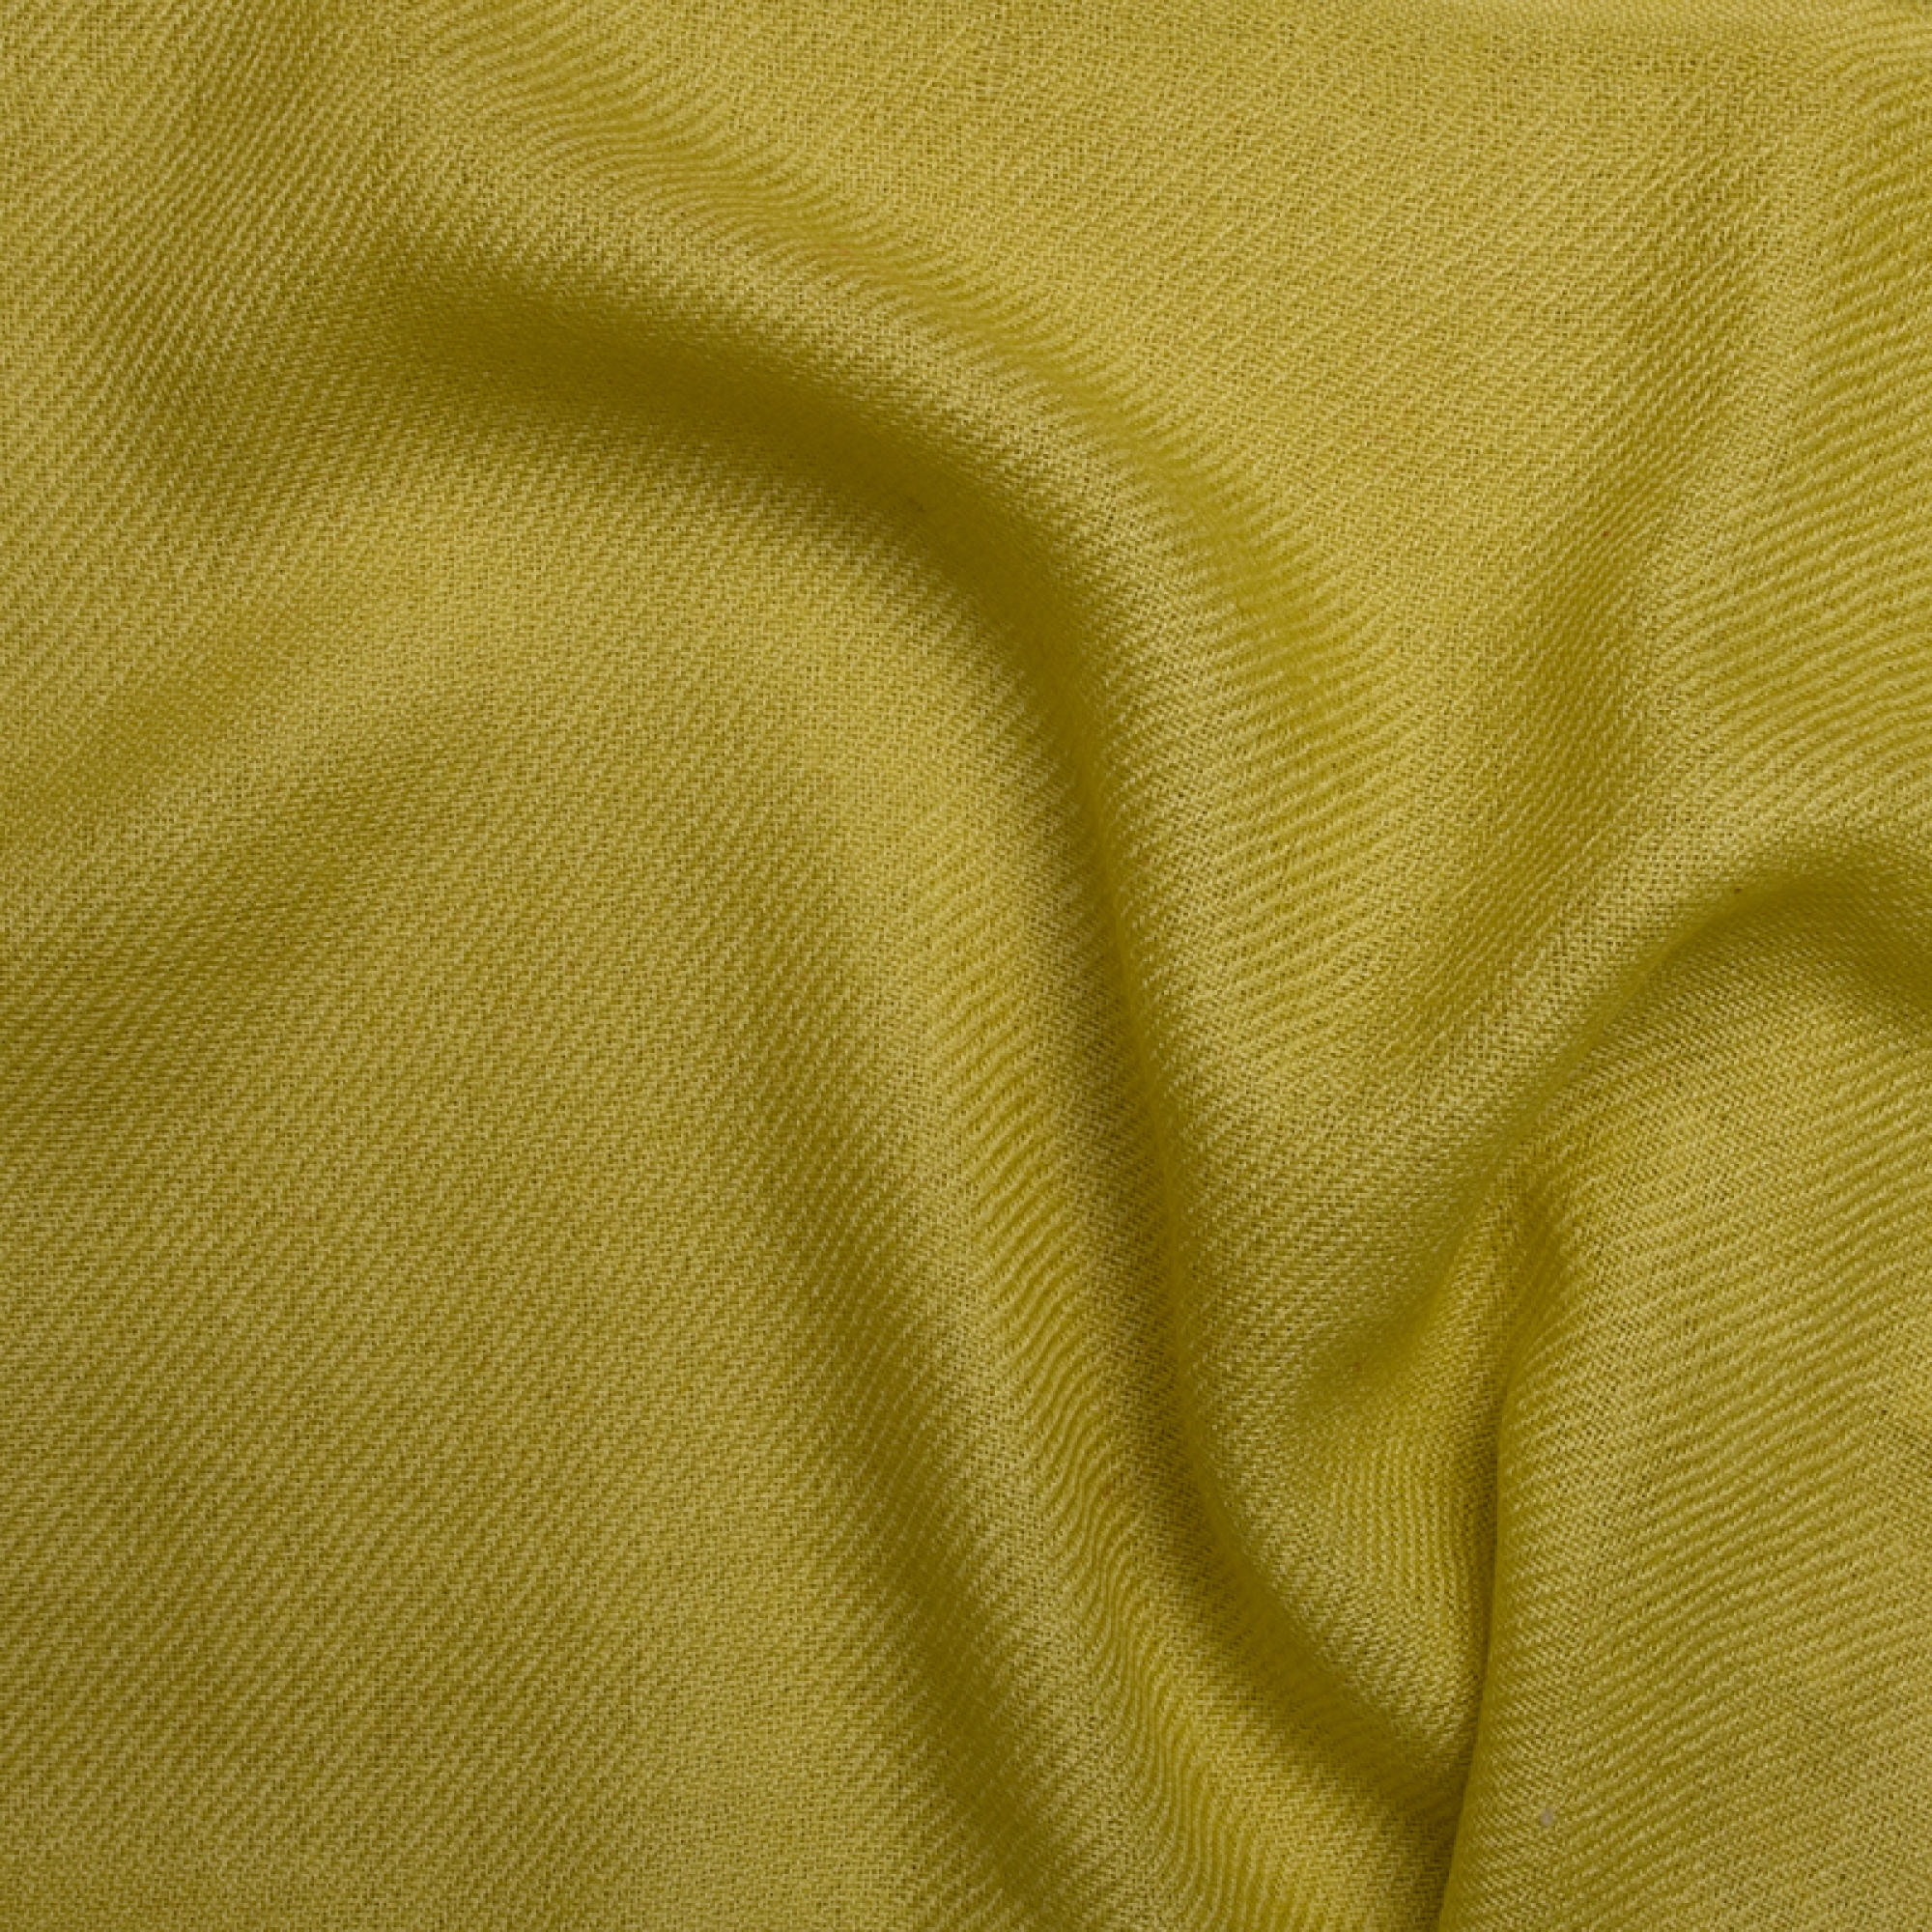 Cashmere accessories blanket toodoo plain xl 240 x 260 sunny lime 240 x 260 cm